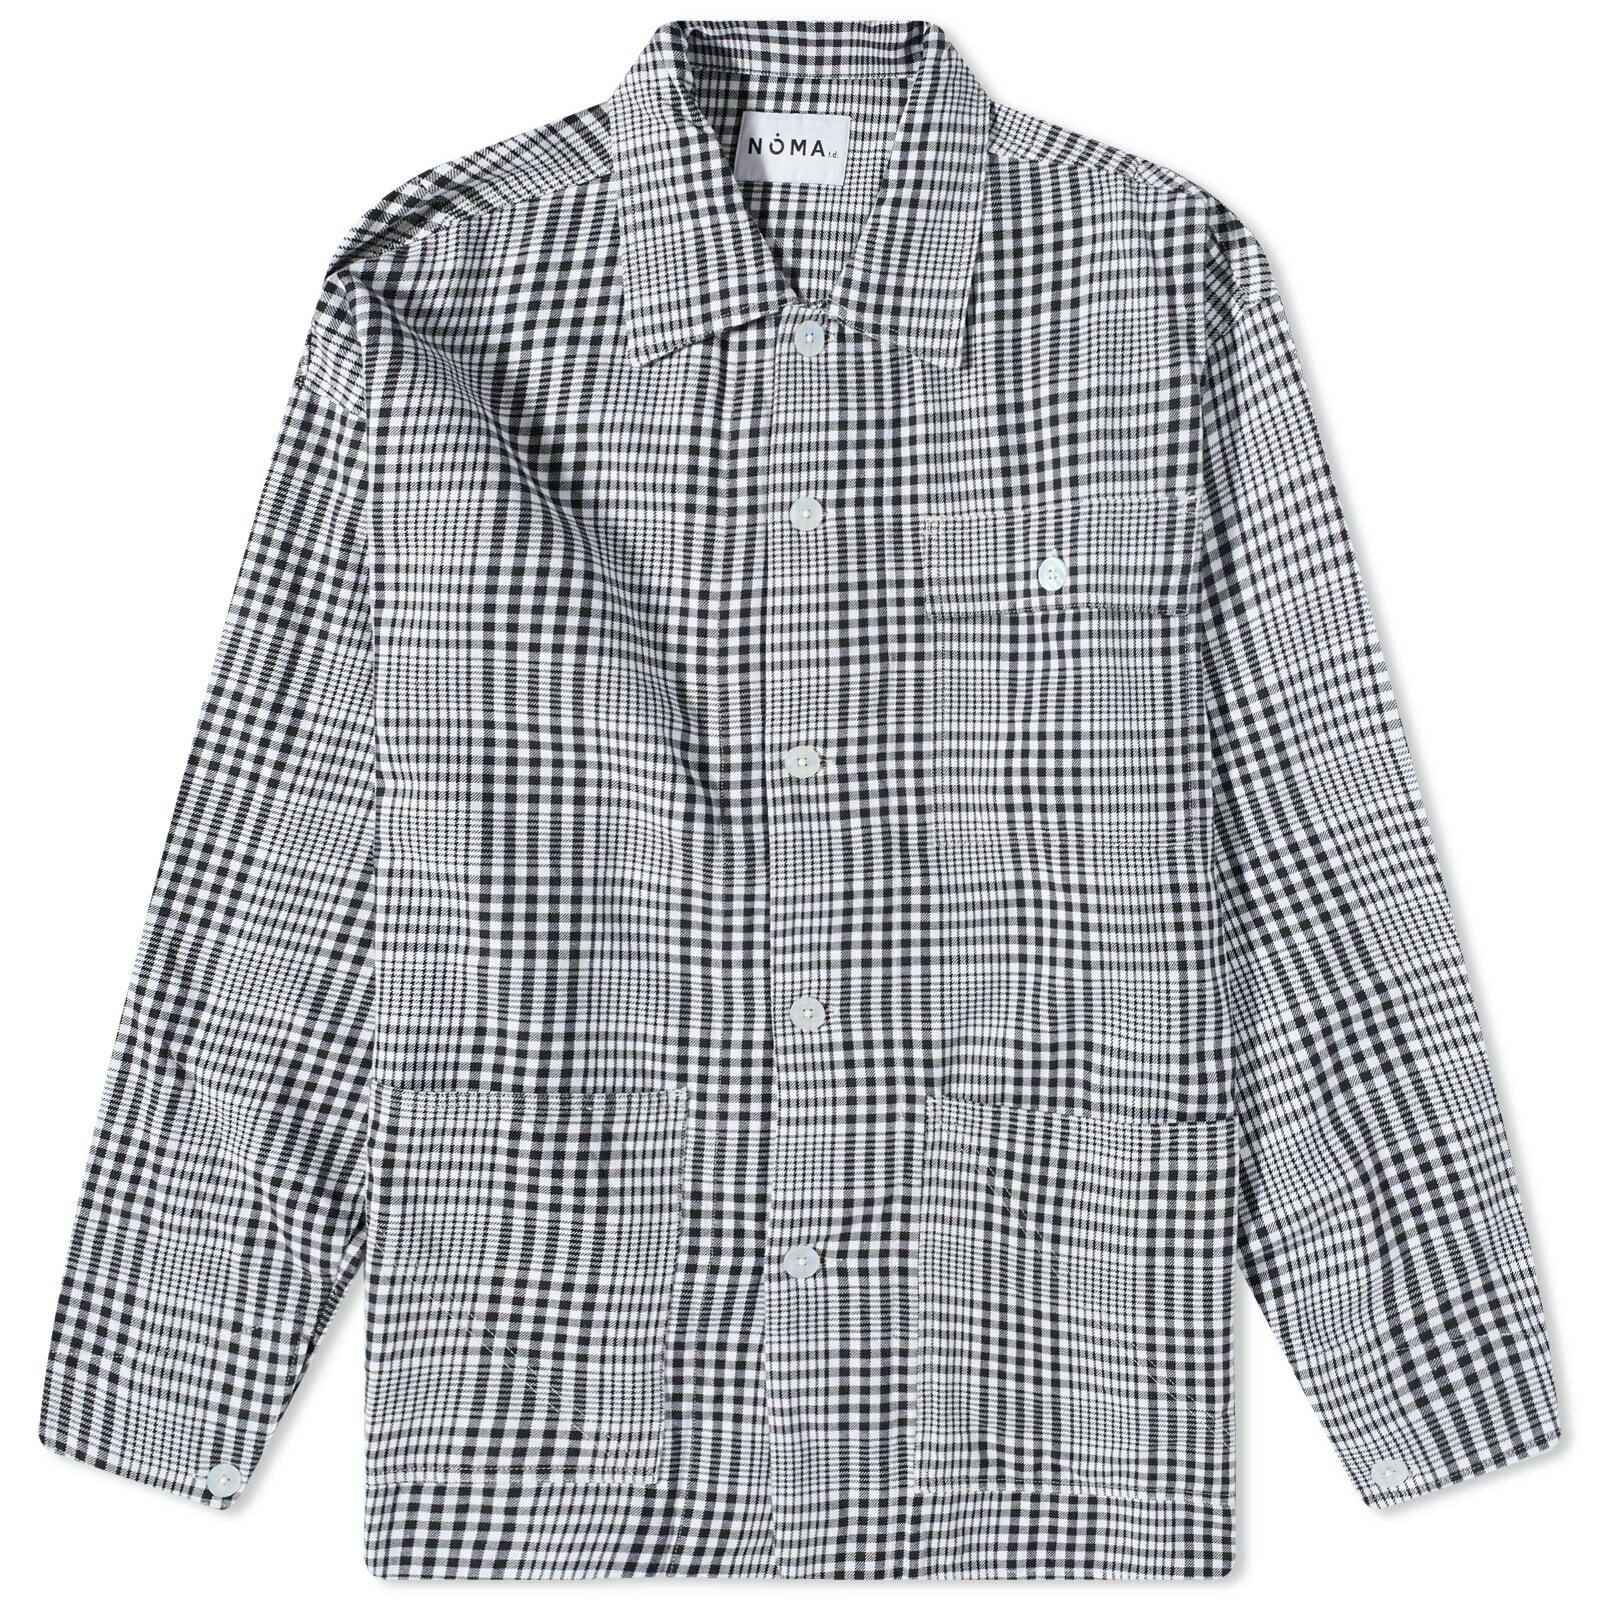 Noma t.d. Men's Gingham Check Coverall Jacket in Black NOMA t.d.